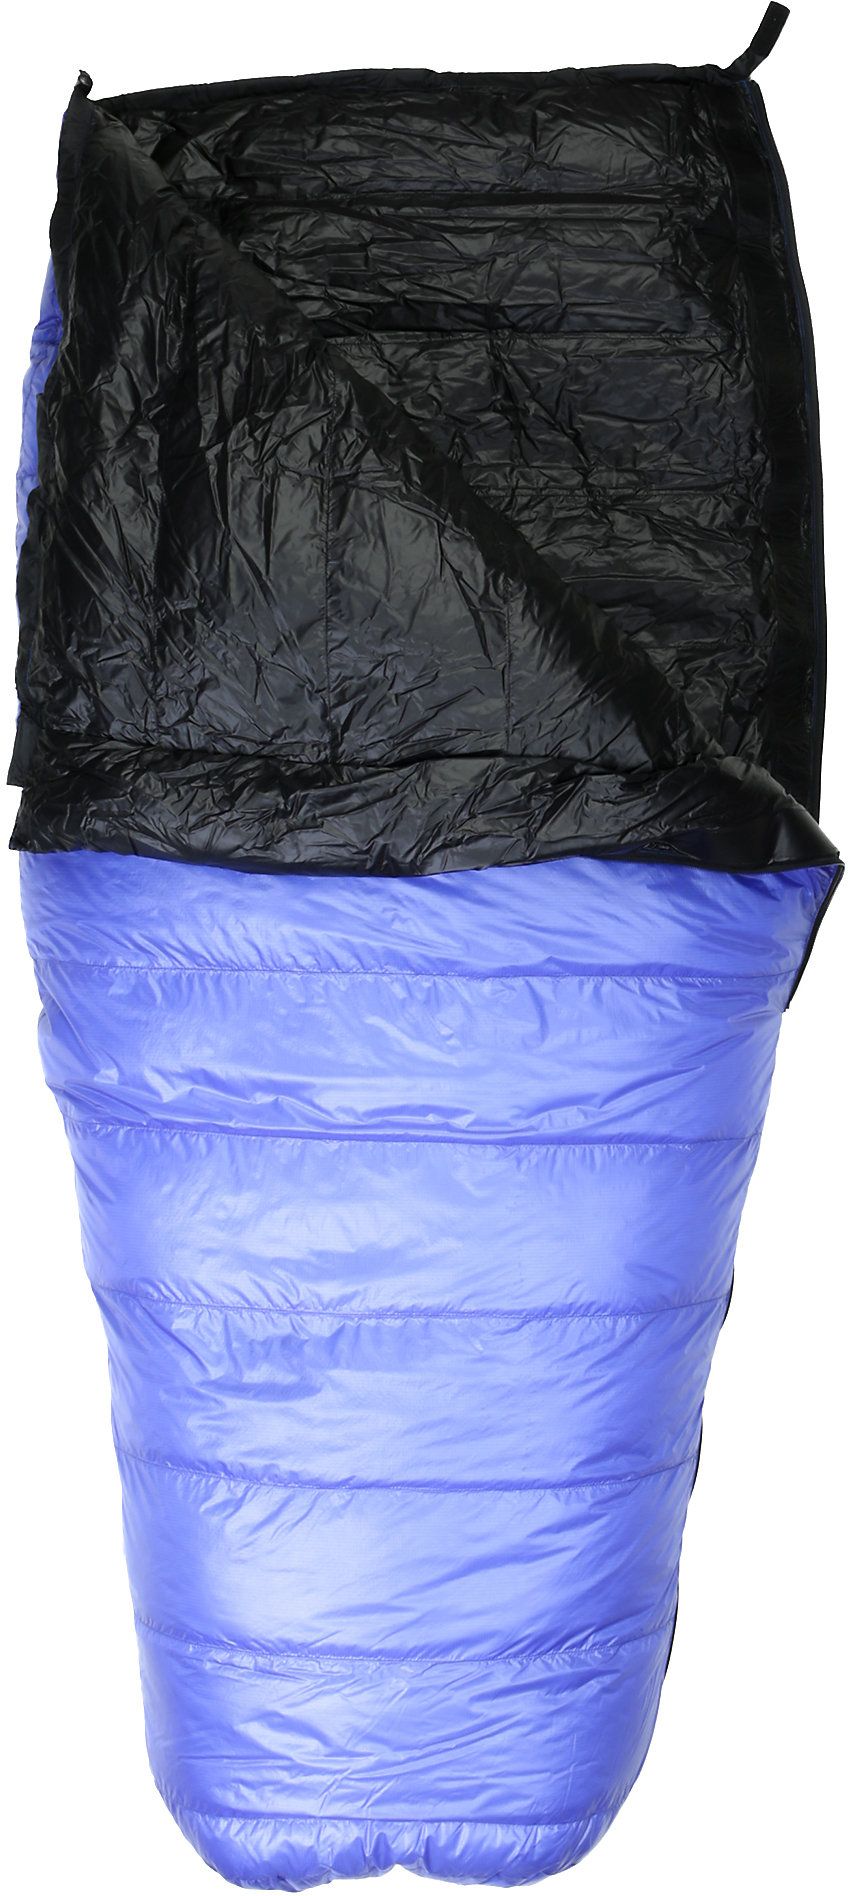 Photos - Suitcase / Backpack Cover Western Mountaineering Alder MF 25 Degree Sleeping Bag, Men's, Royal Blue/